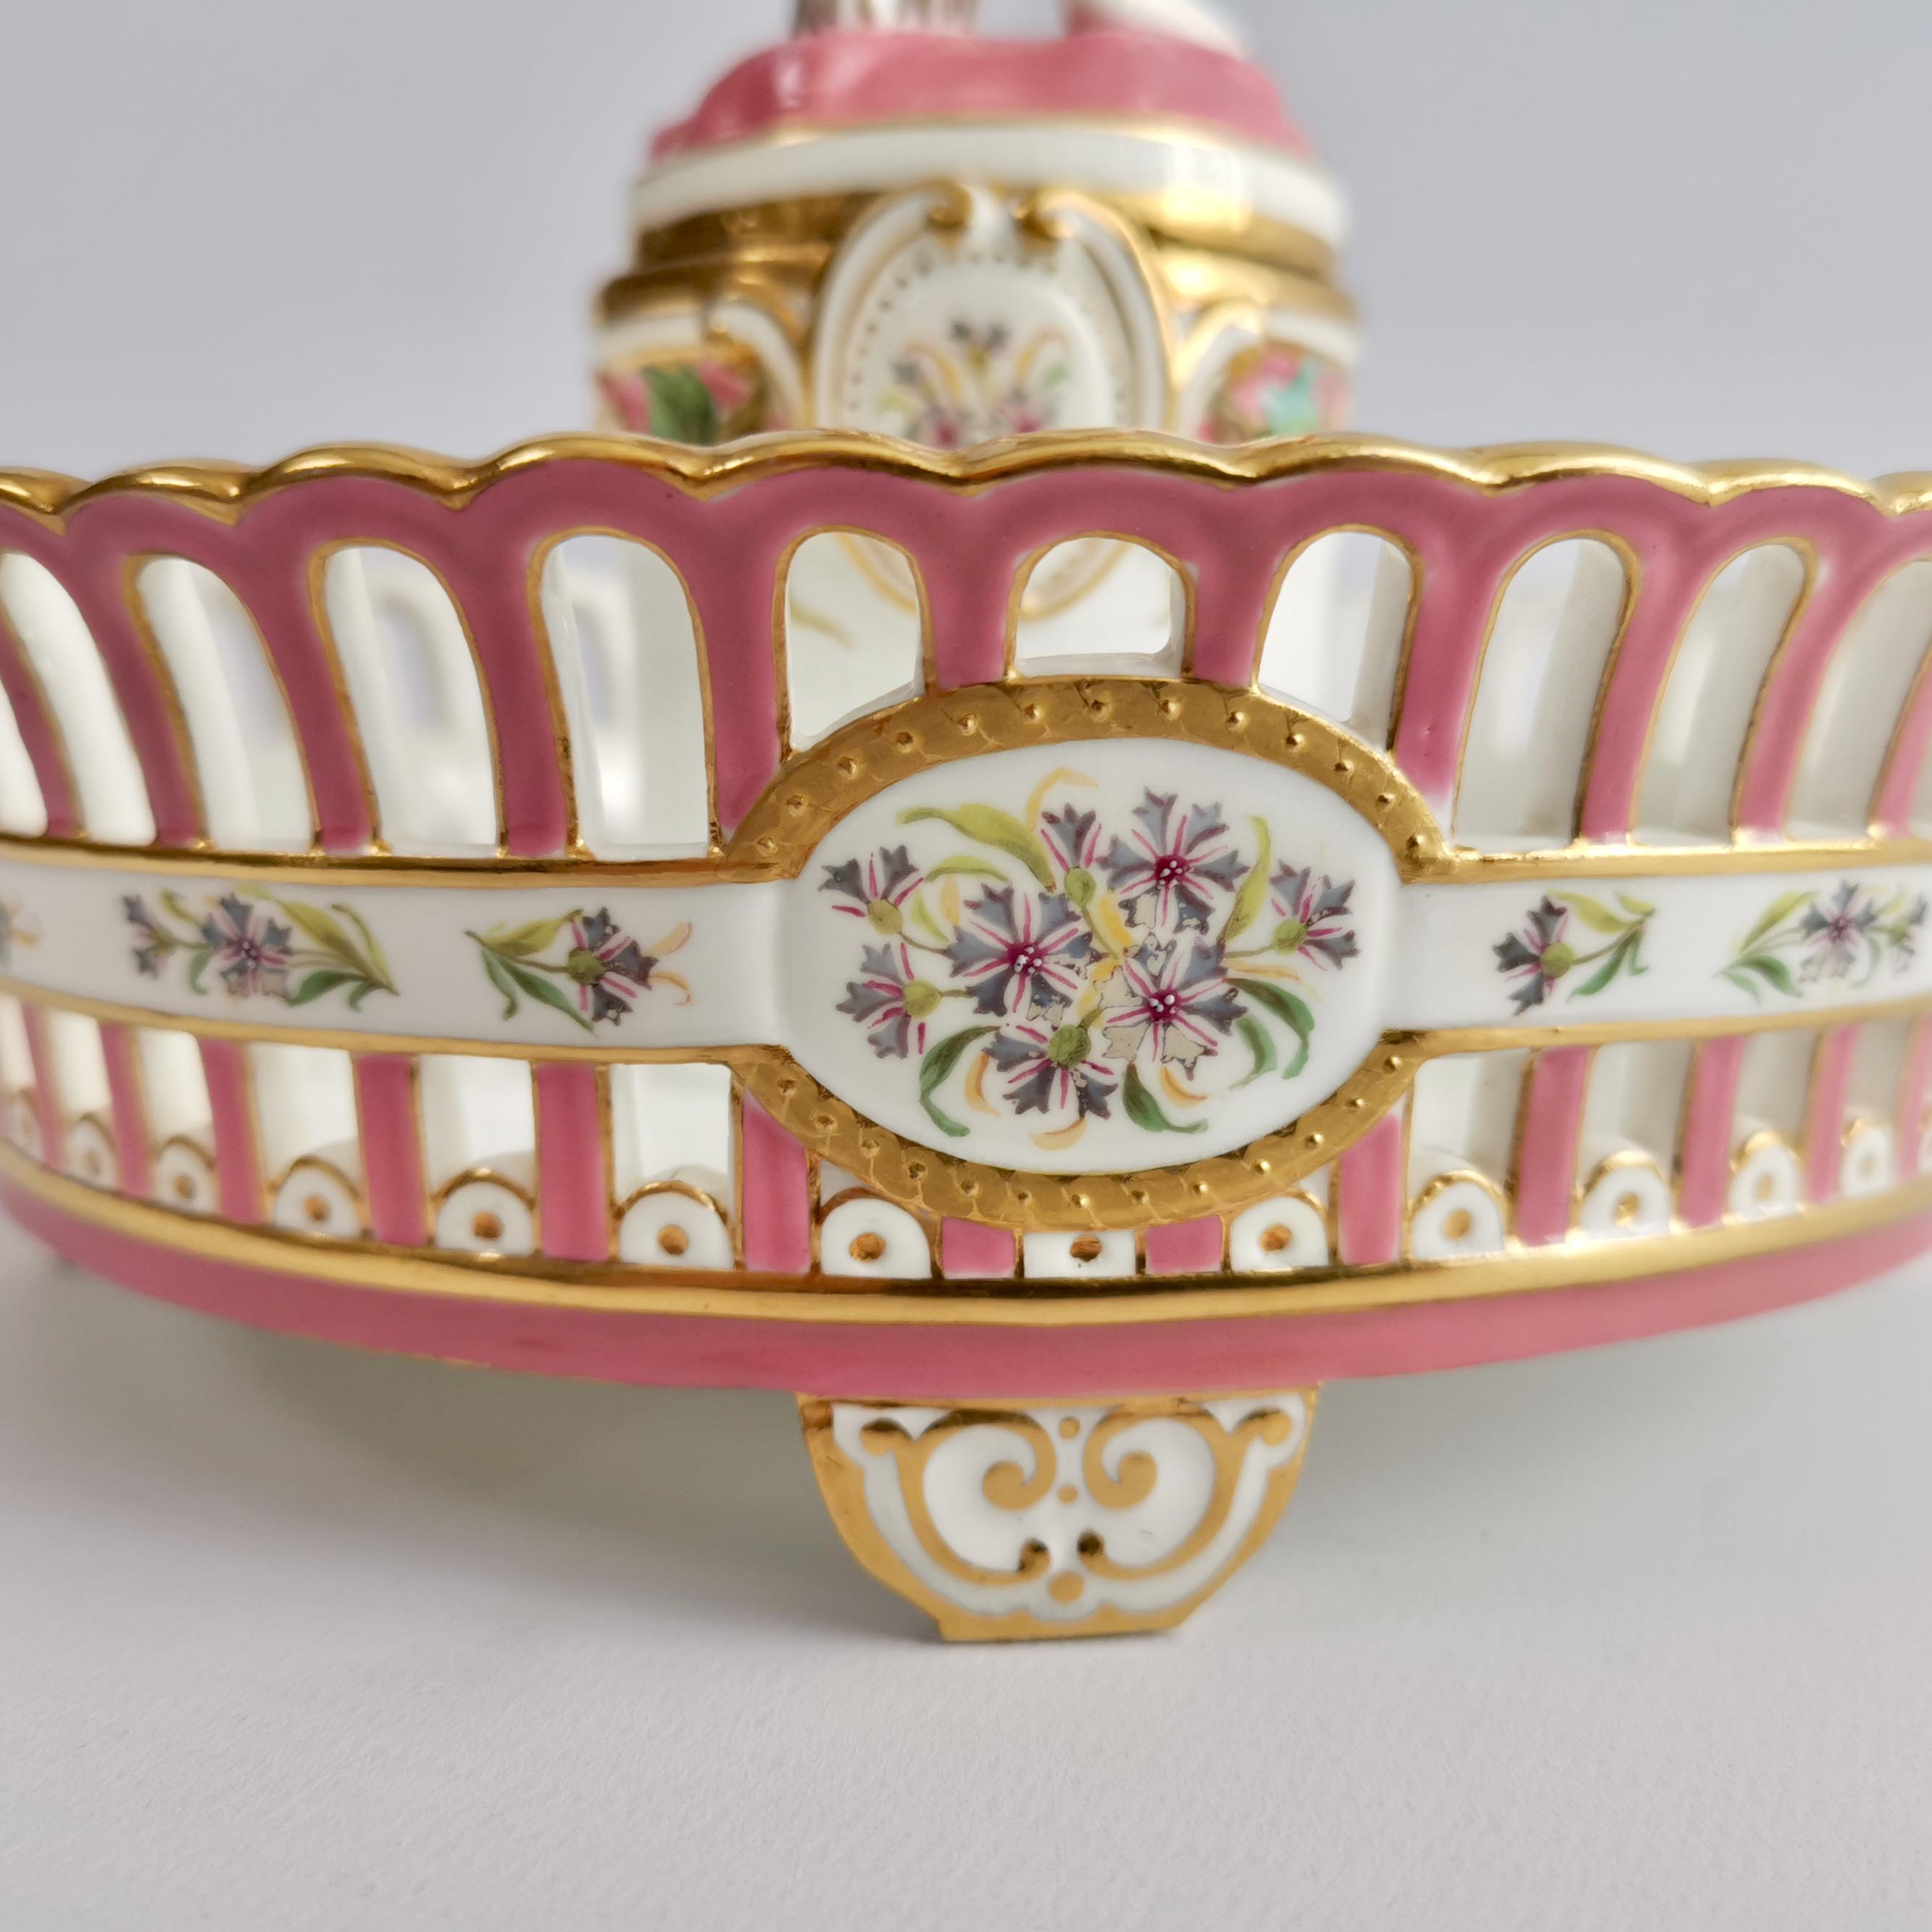 Minton Porcelain Tazza Dish, White and Pink with Cherub, 1891 3